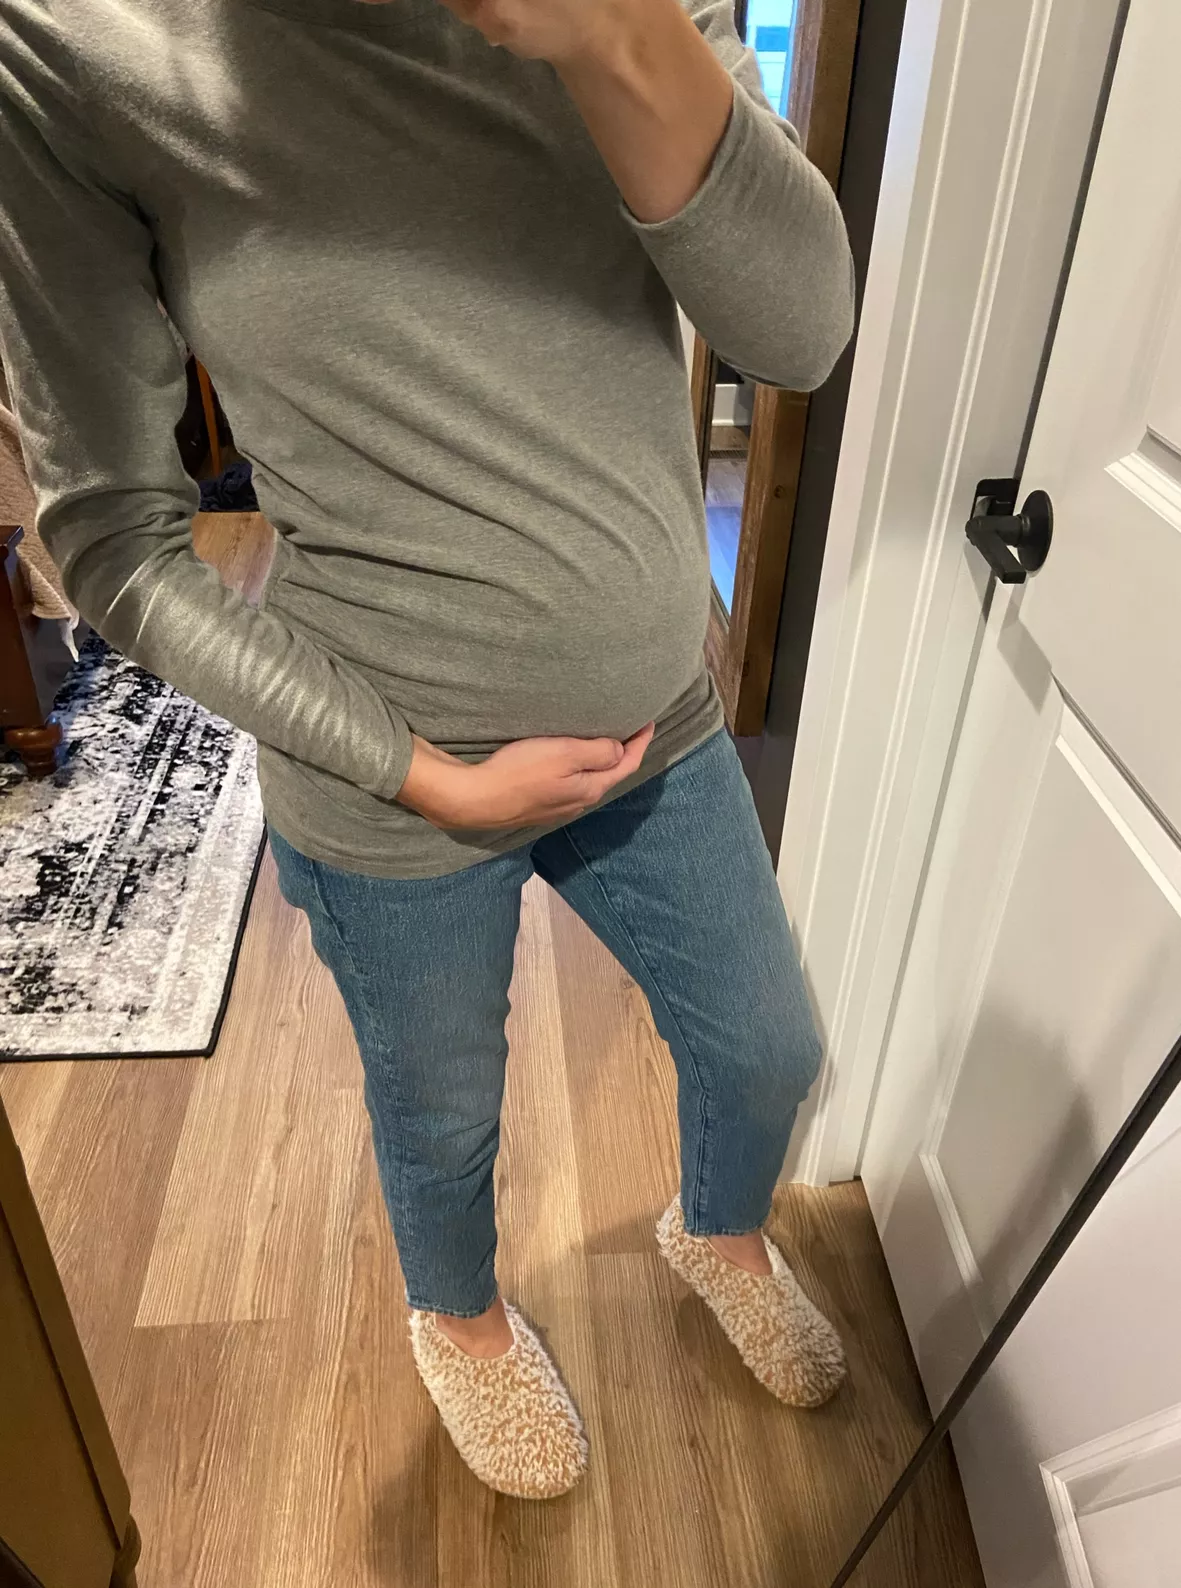 Maternity Jean Rundown - Which Styles Are Best For You? - The Mom Edit